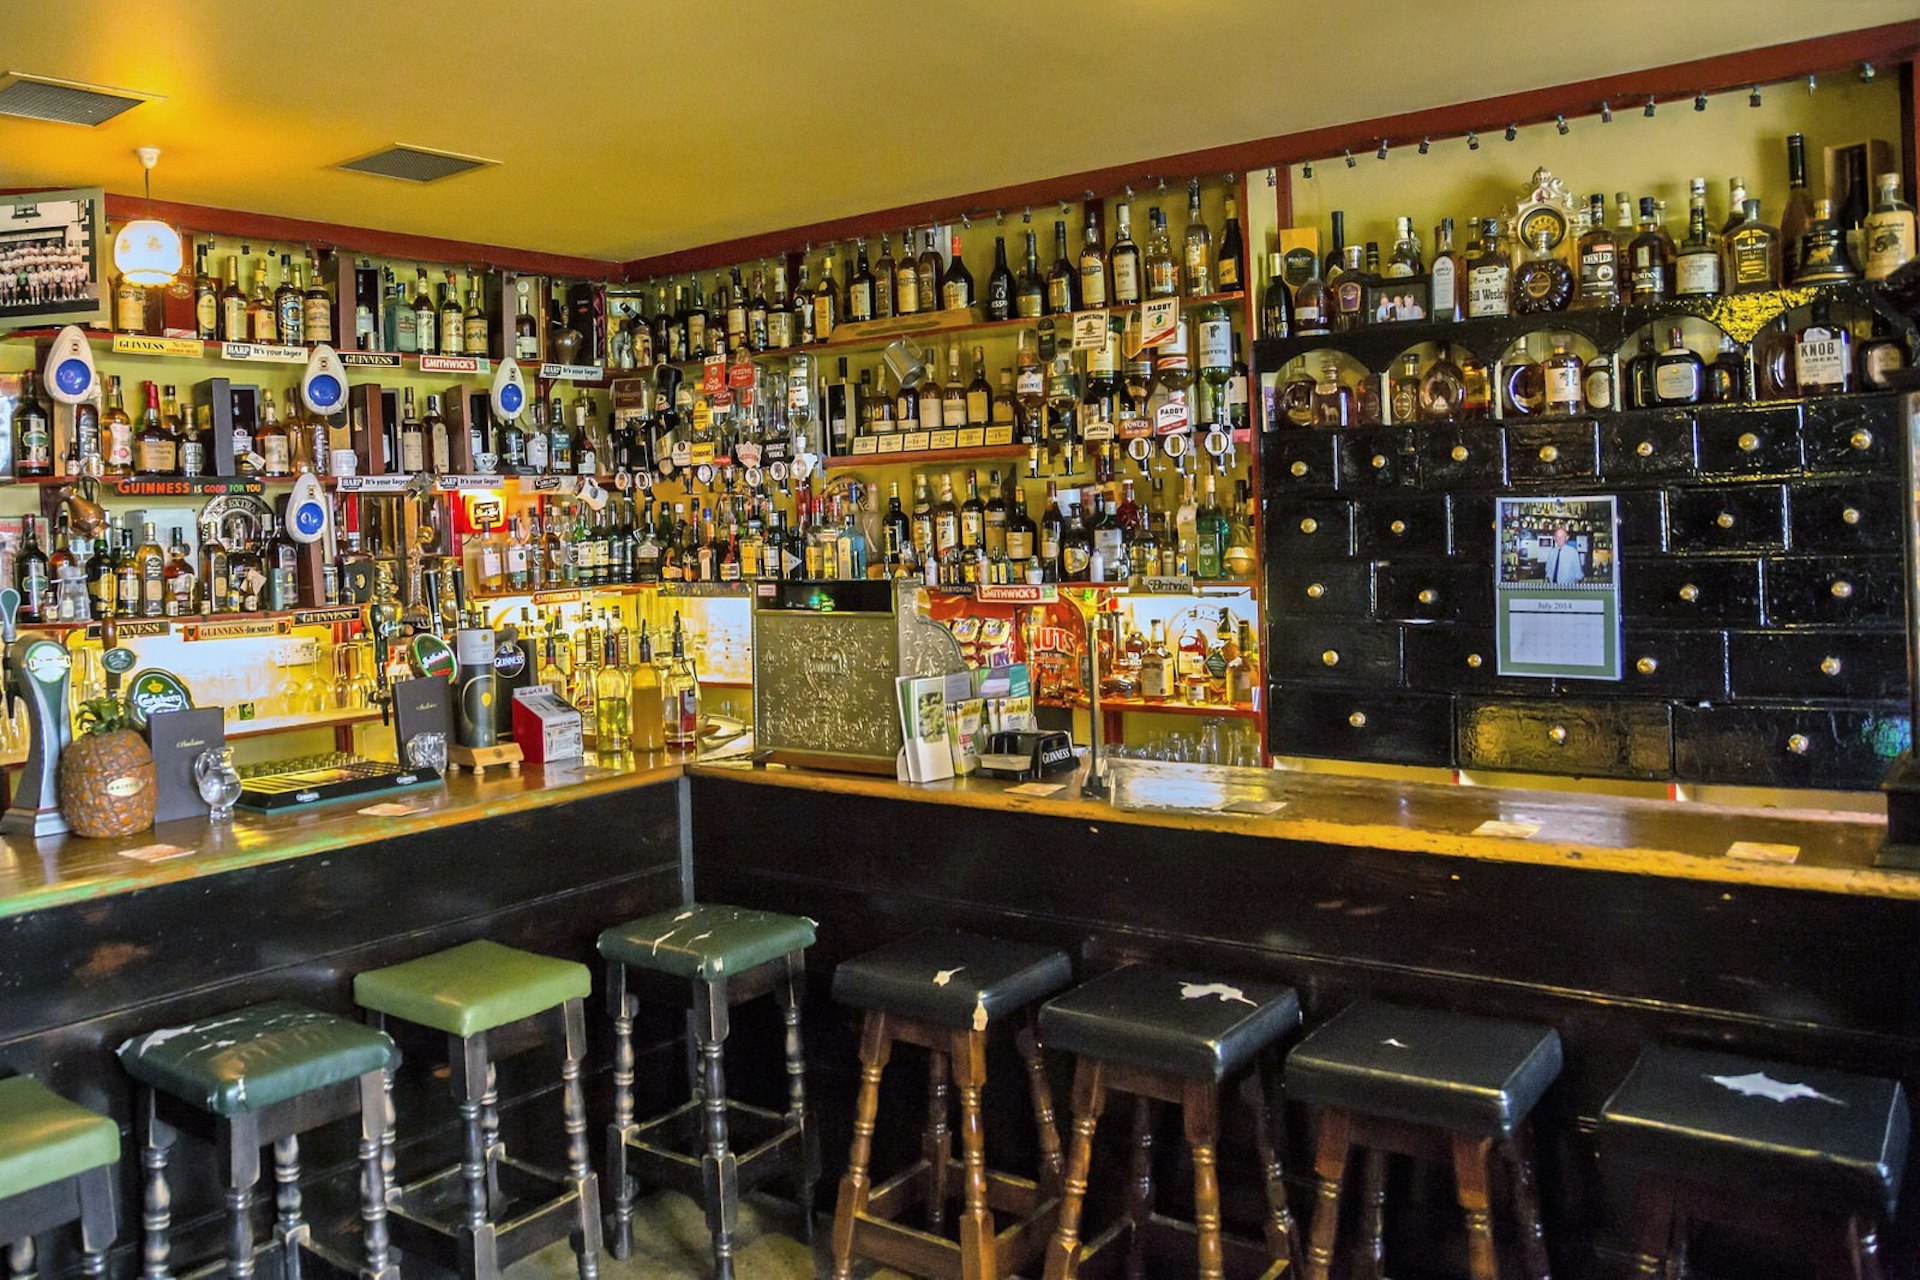 Unchanged decor and a warm welcome at one of Ireland's best whiskey bar, O'Loclainn's © Vic O'Sullivan